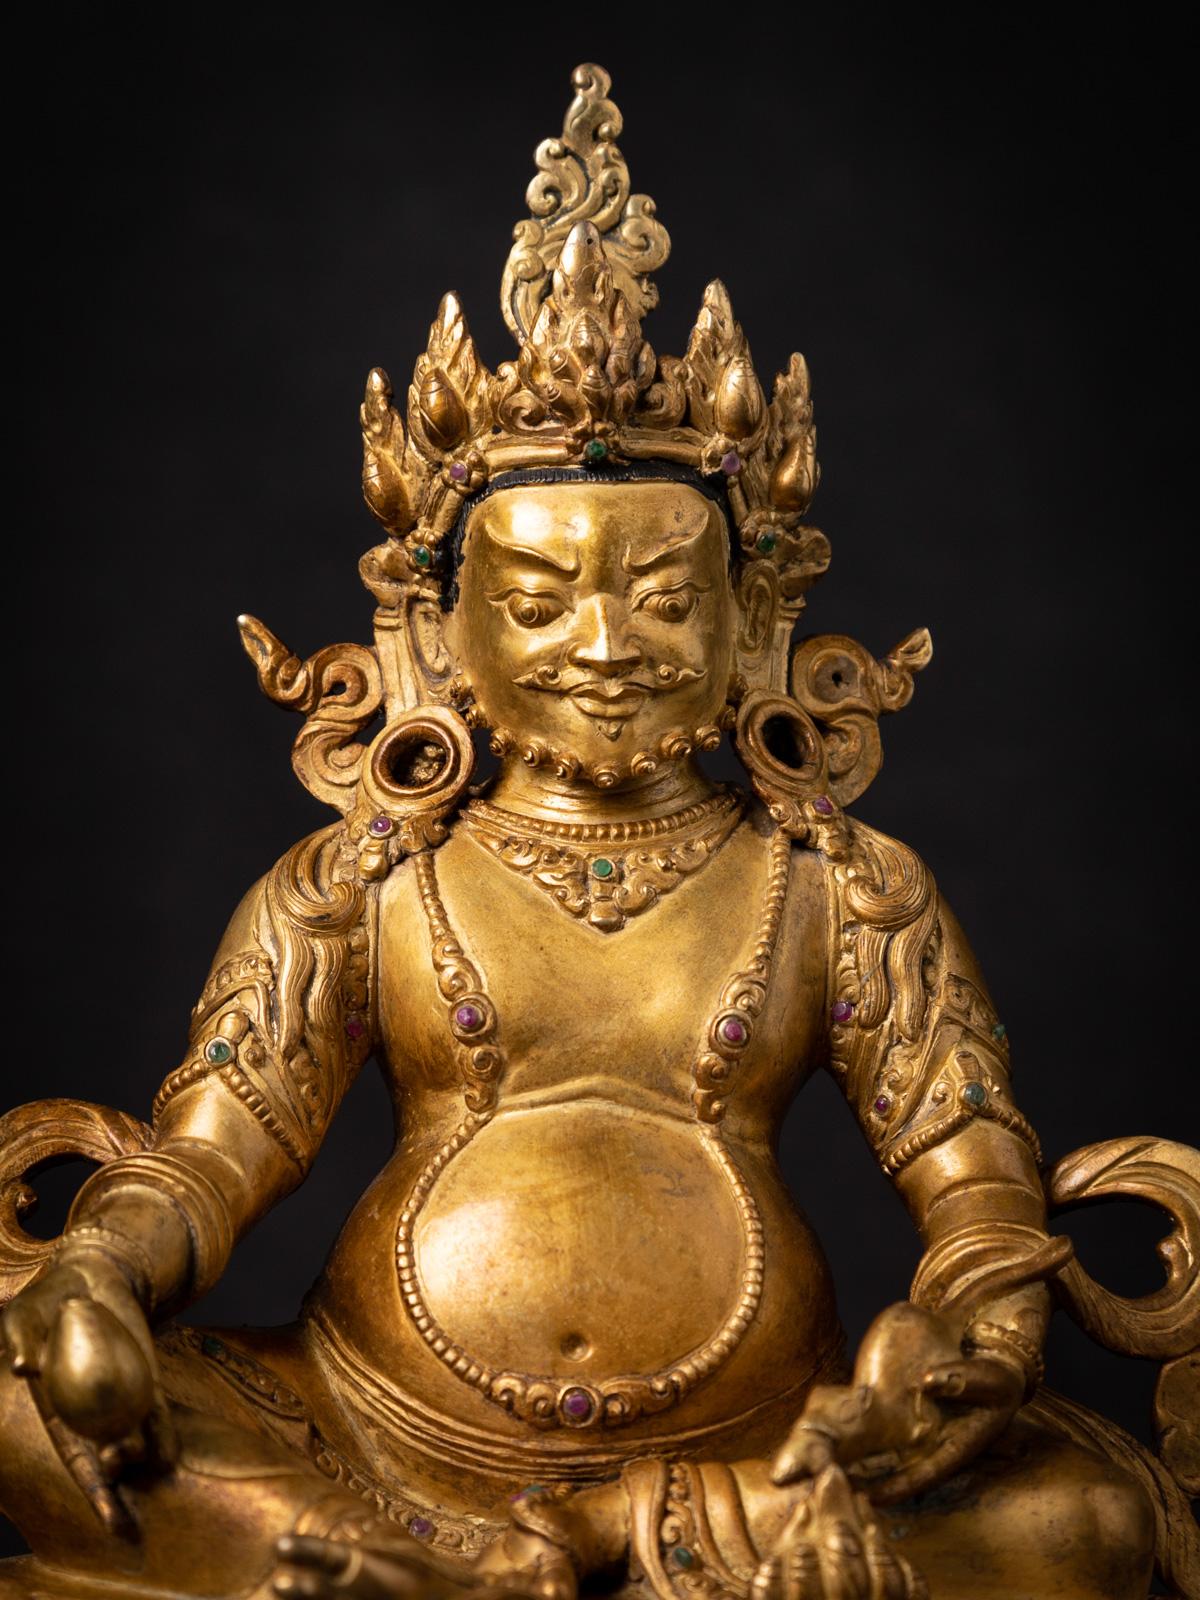 Nepalese Mid-20th century Old bronze Nepali Kuber statue fire gilded with 24 krt. gold